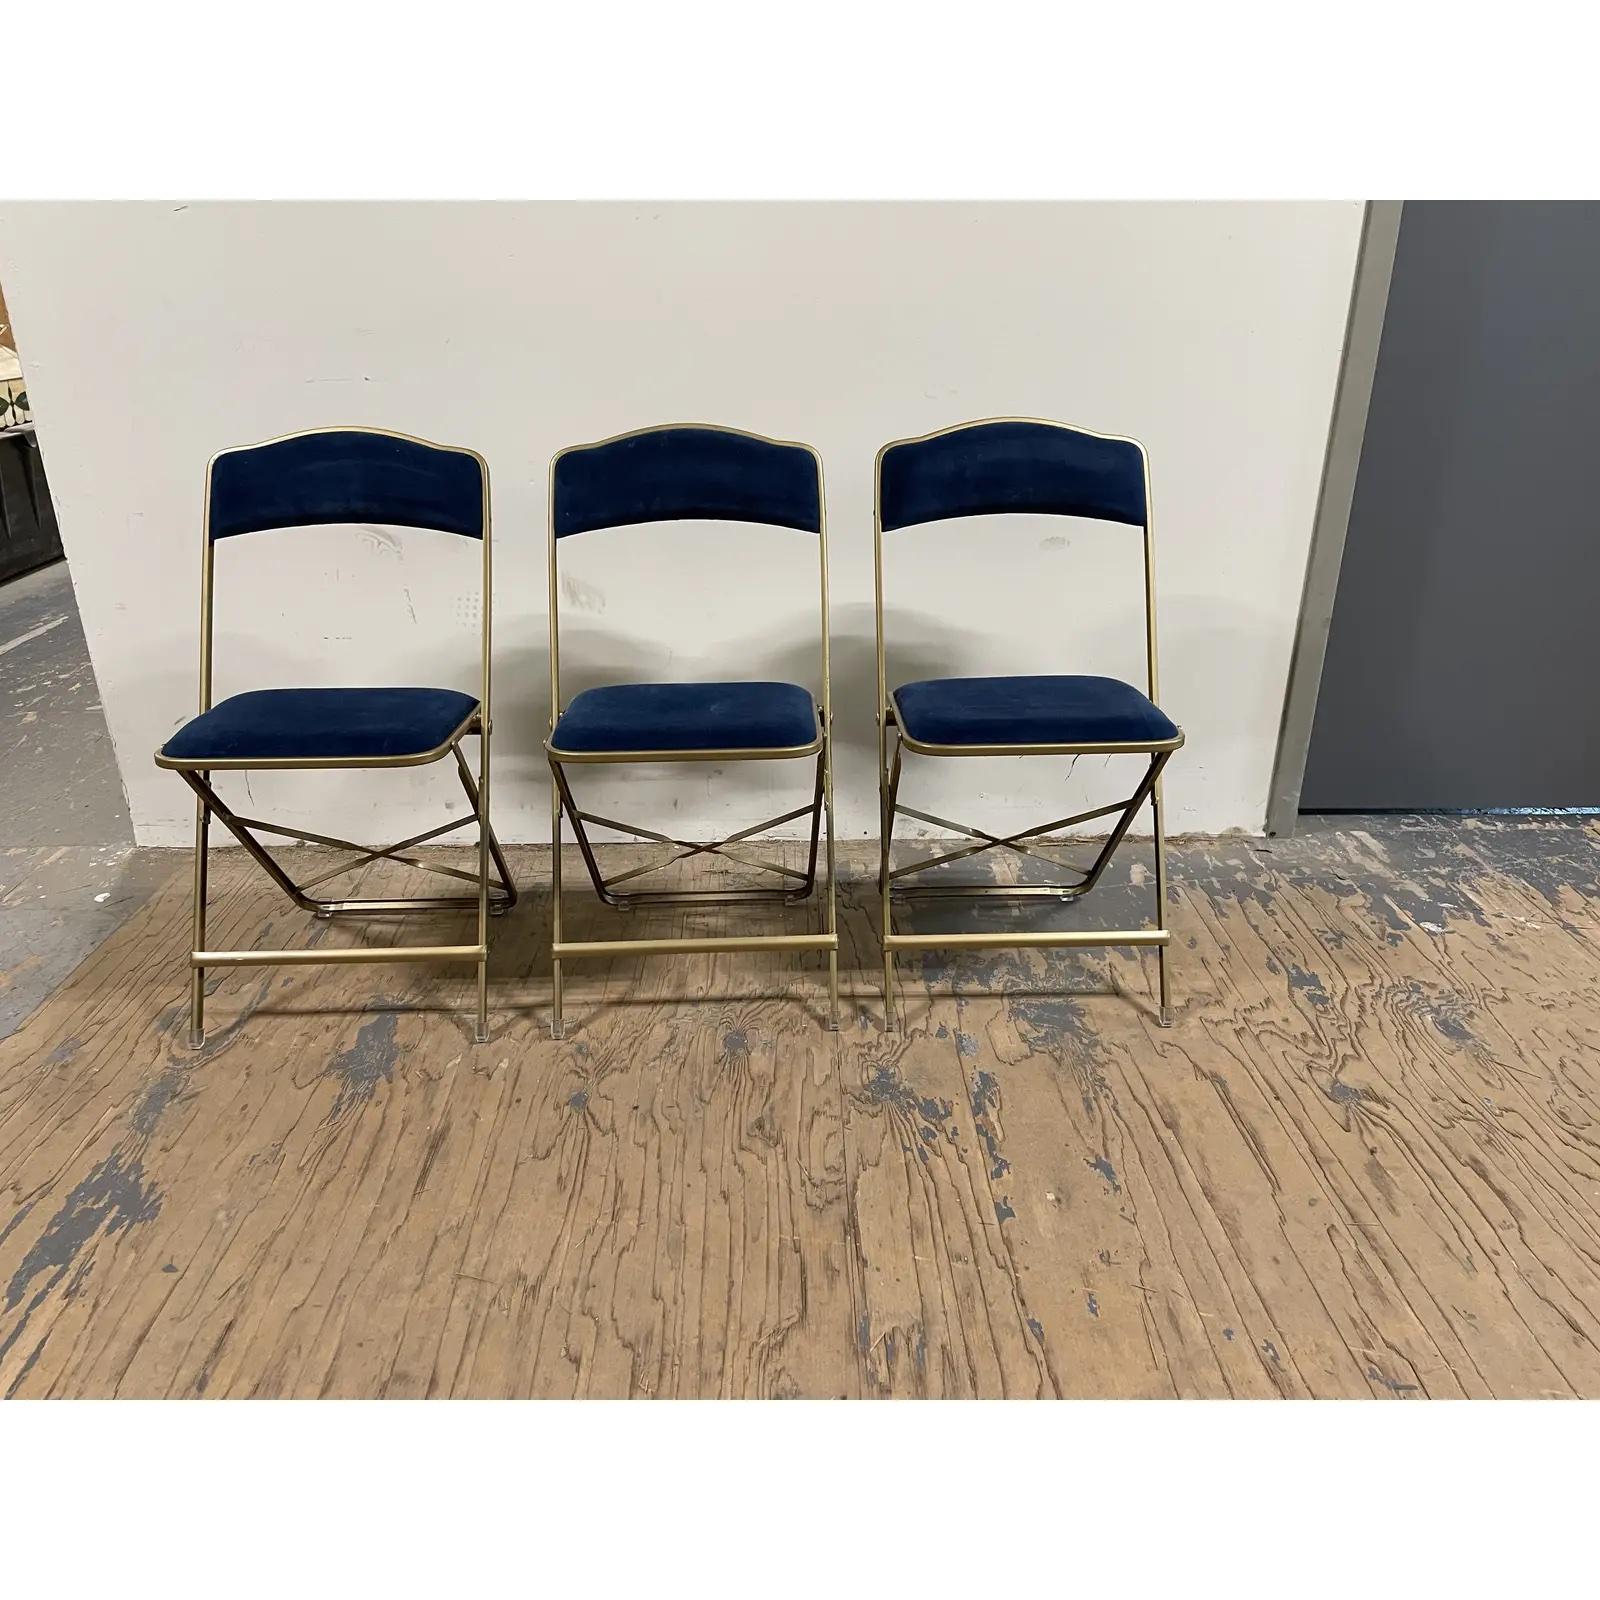 Set of 3 vintage metal and mohair folding chairs by Fritz & Co.

Slim gold frame with Blue velvet upholstery.

In EXCELLENT condition 